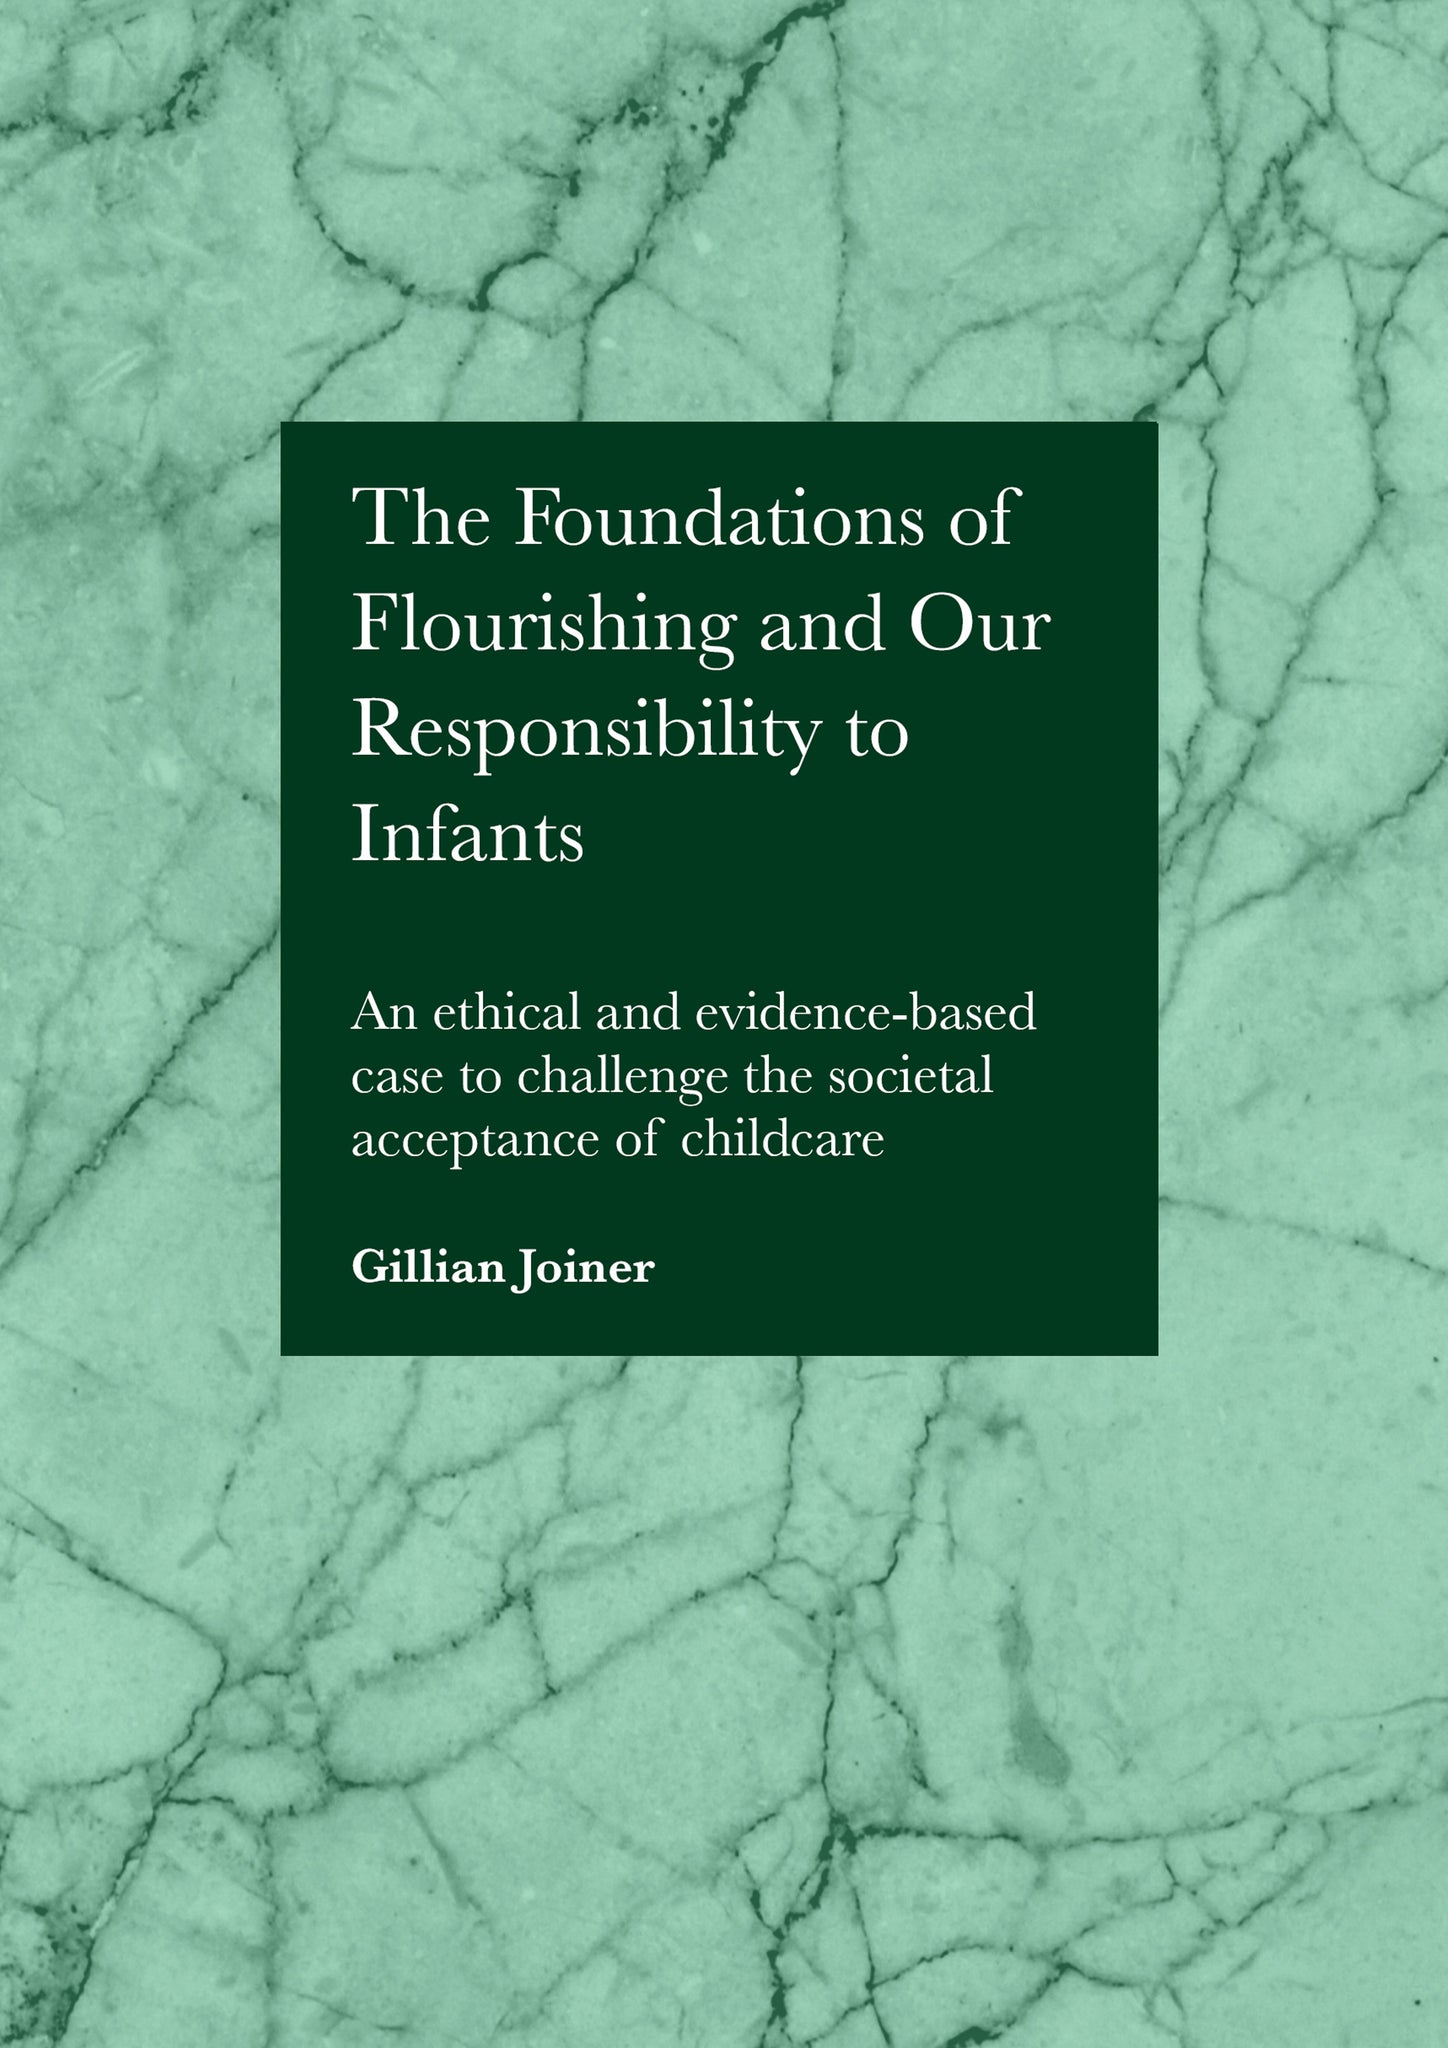 The Foundations of Flourishing and Our Responsibility to Infants